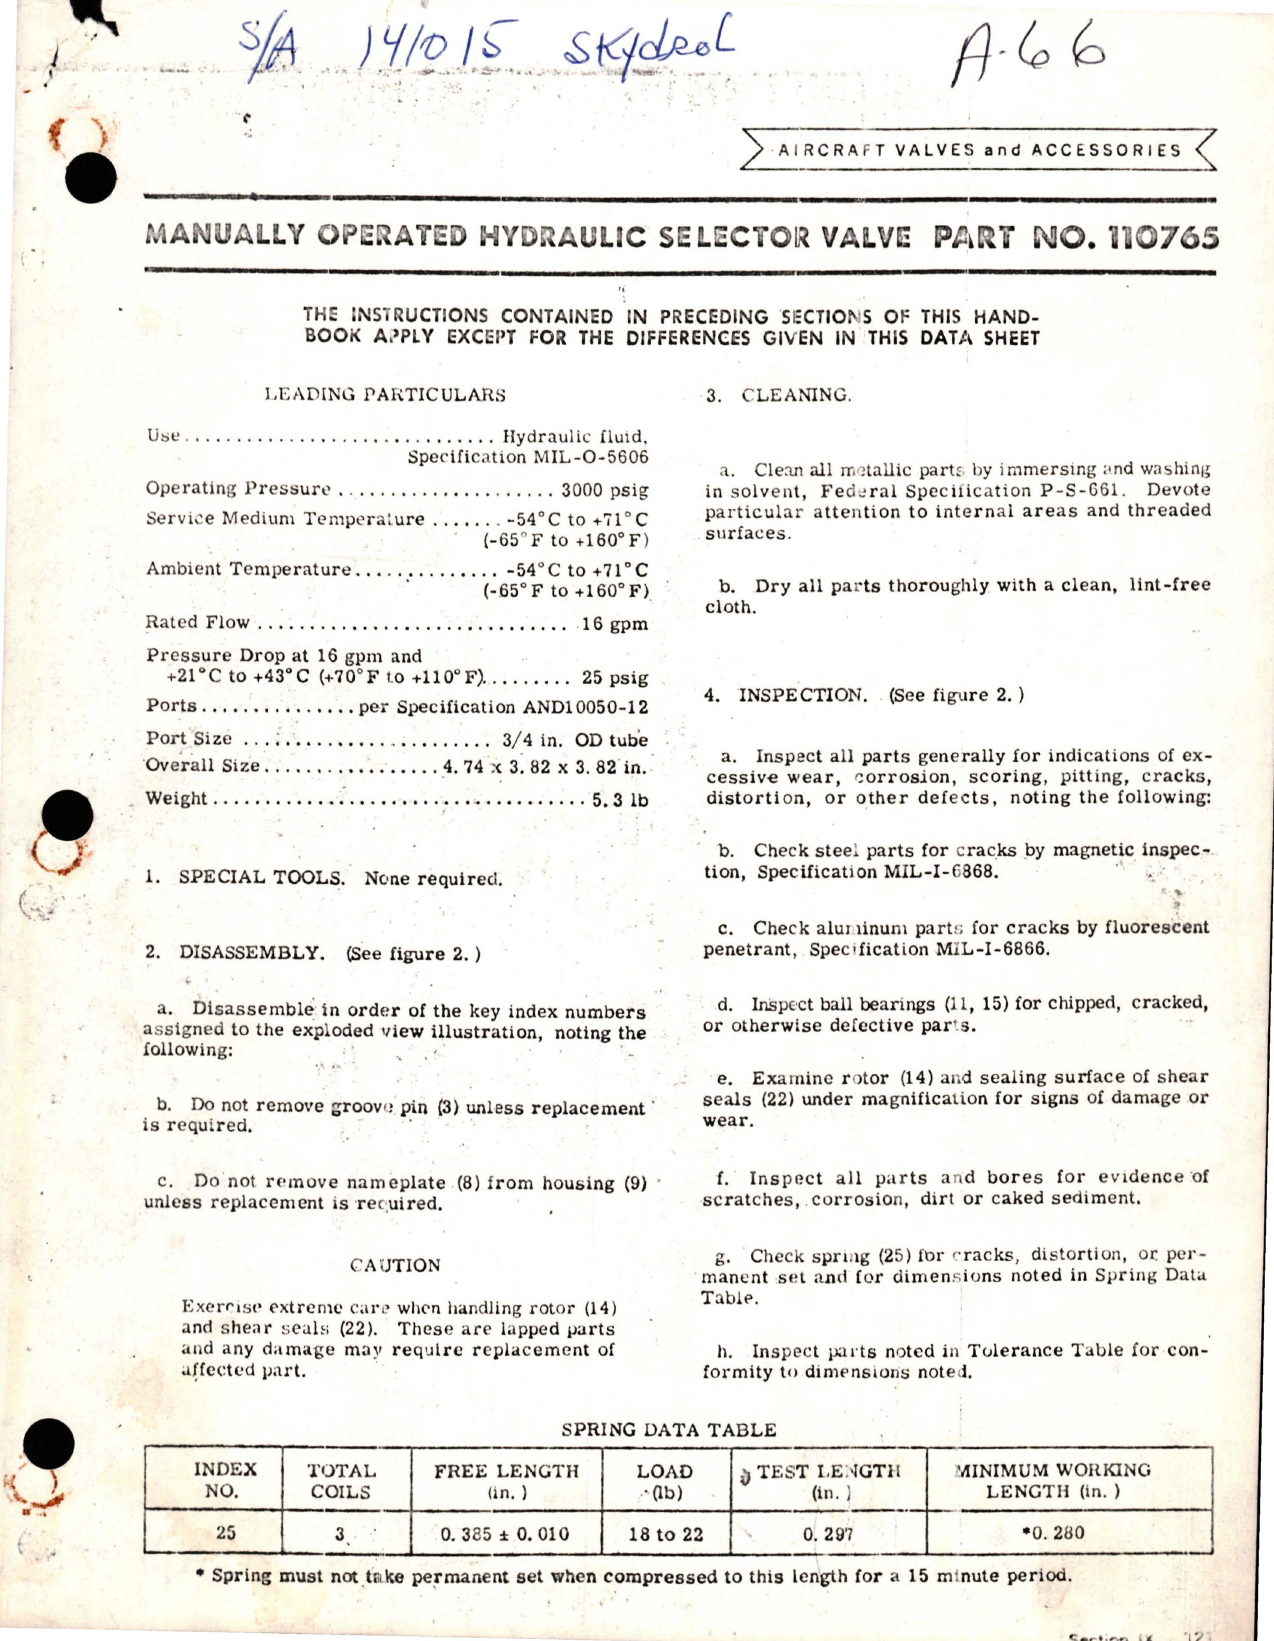 Sample page 1 from AirCorps Library document: Instructions for Manually Operated Hydraulic Selector Valve - Part 110765